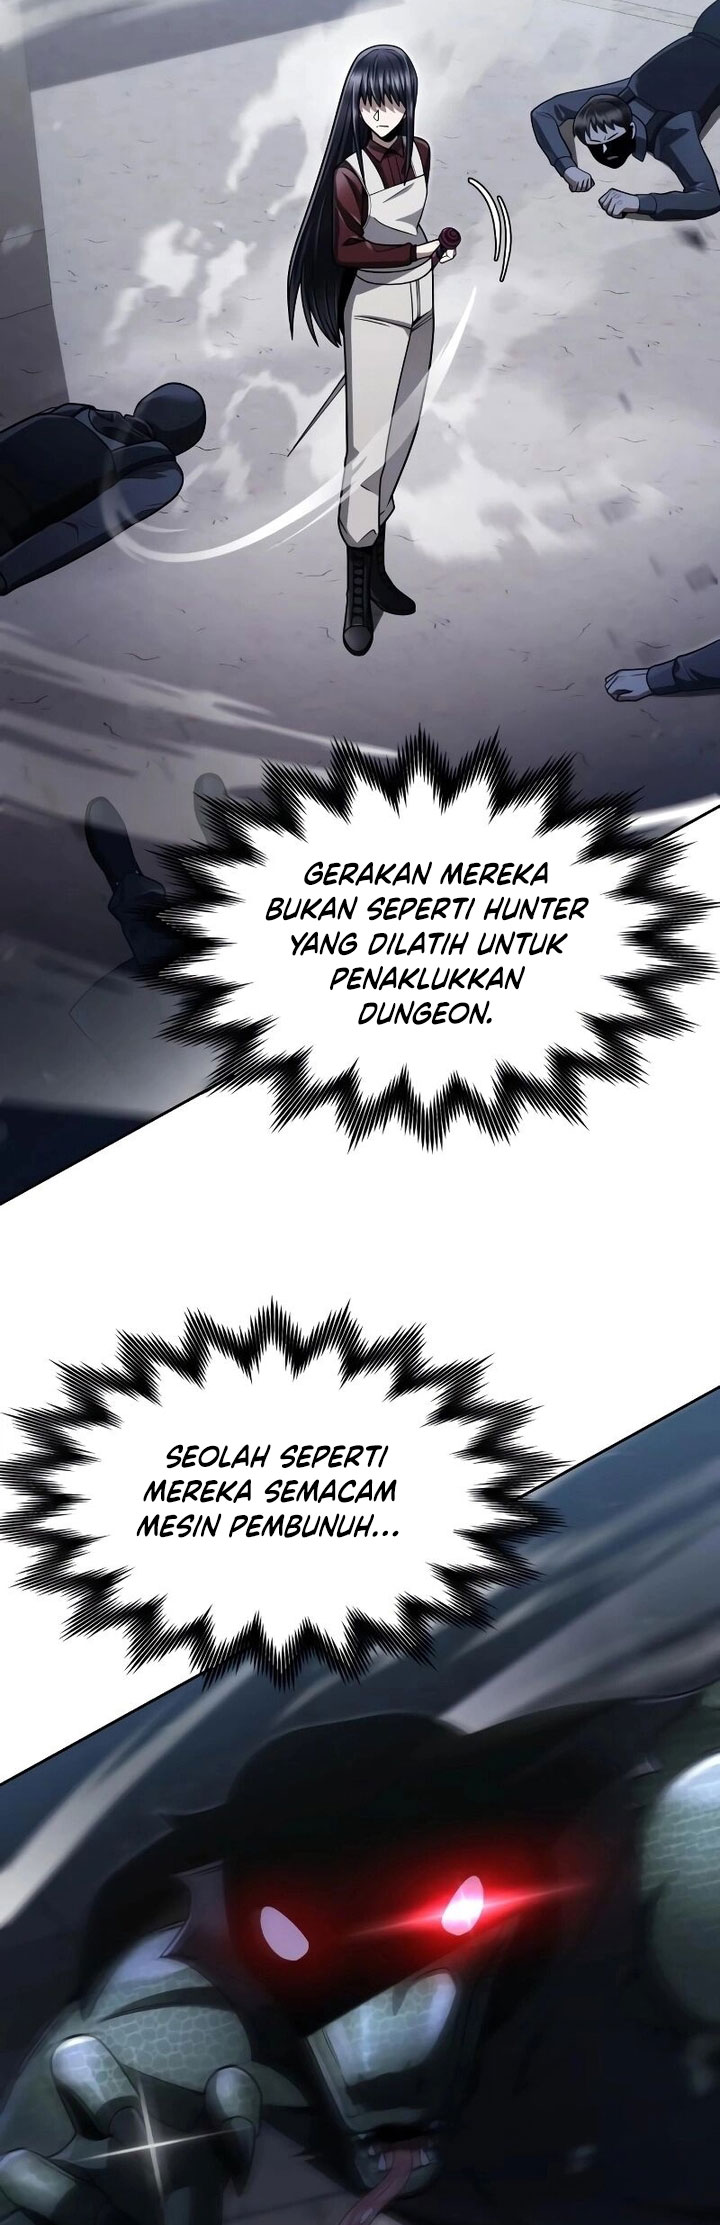 Dilarang COPAS - situs resmi www.mangacanblog.com - Komik clever cleaning life of the returned genius hunter 065 - chapter 65 66 Indonesia clever cleaning life of the returned genius hunter 065 - chapter 65 Terbaru 30|Baca Manga Komik Indonesia|Mangacan